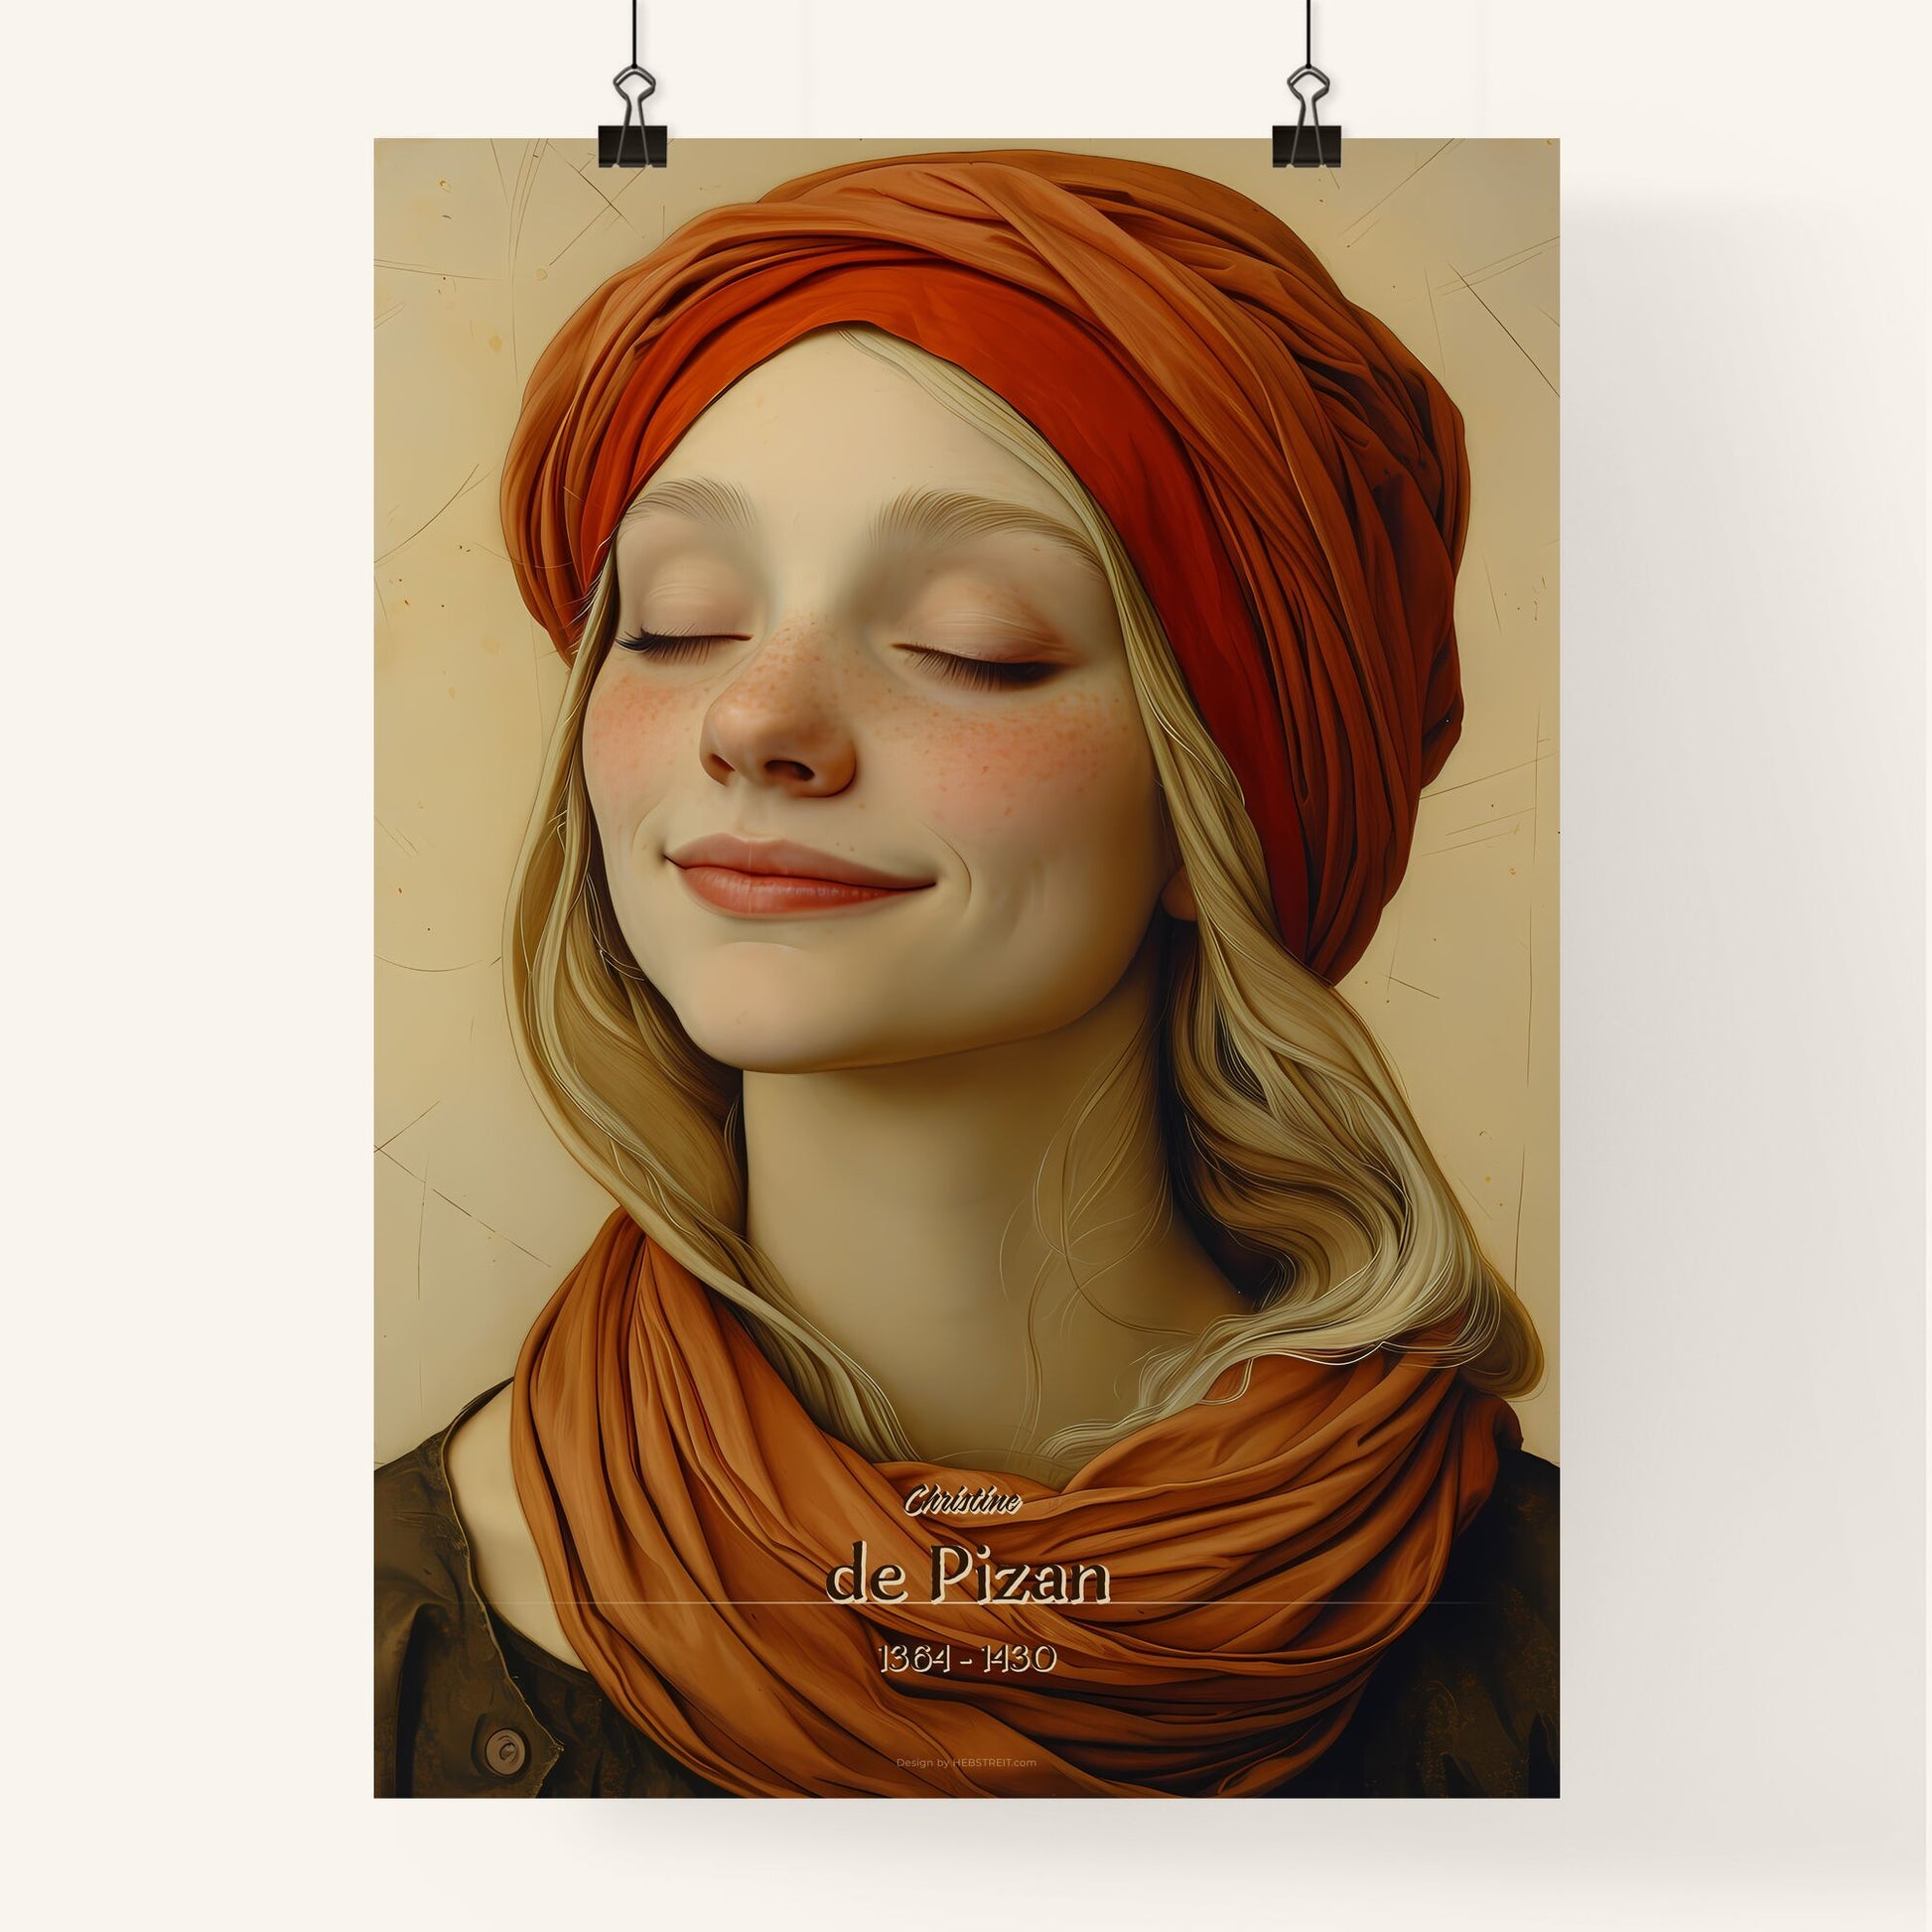 Christine, de Pizan, 1364 - 1430, A Poster of a woman with her eyes closed Default Title